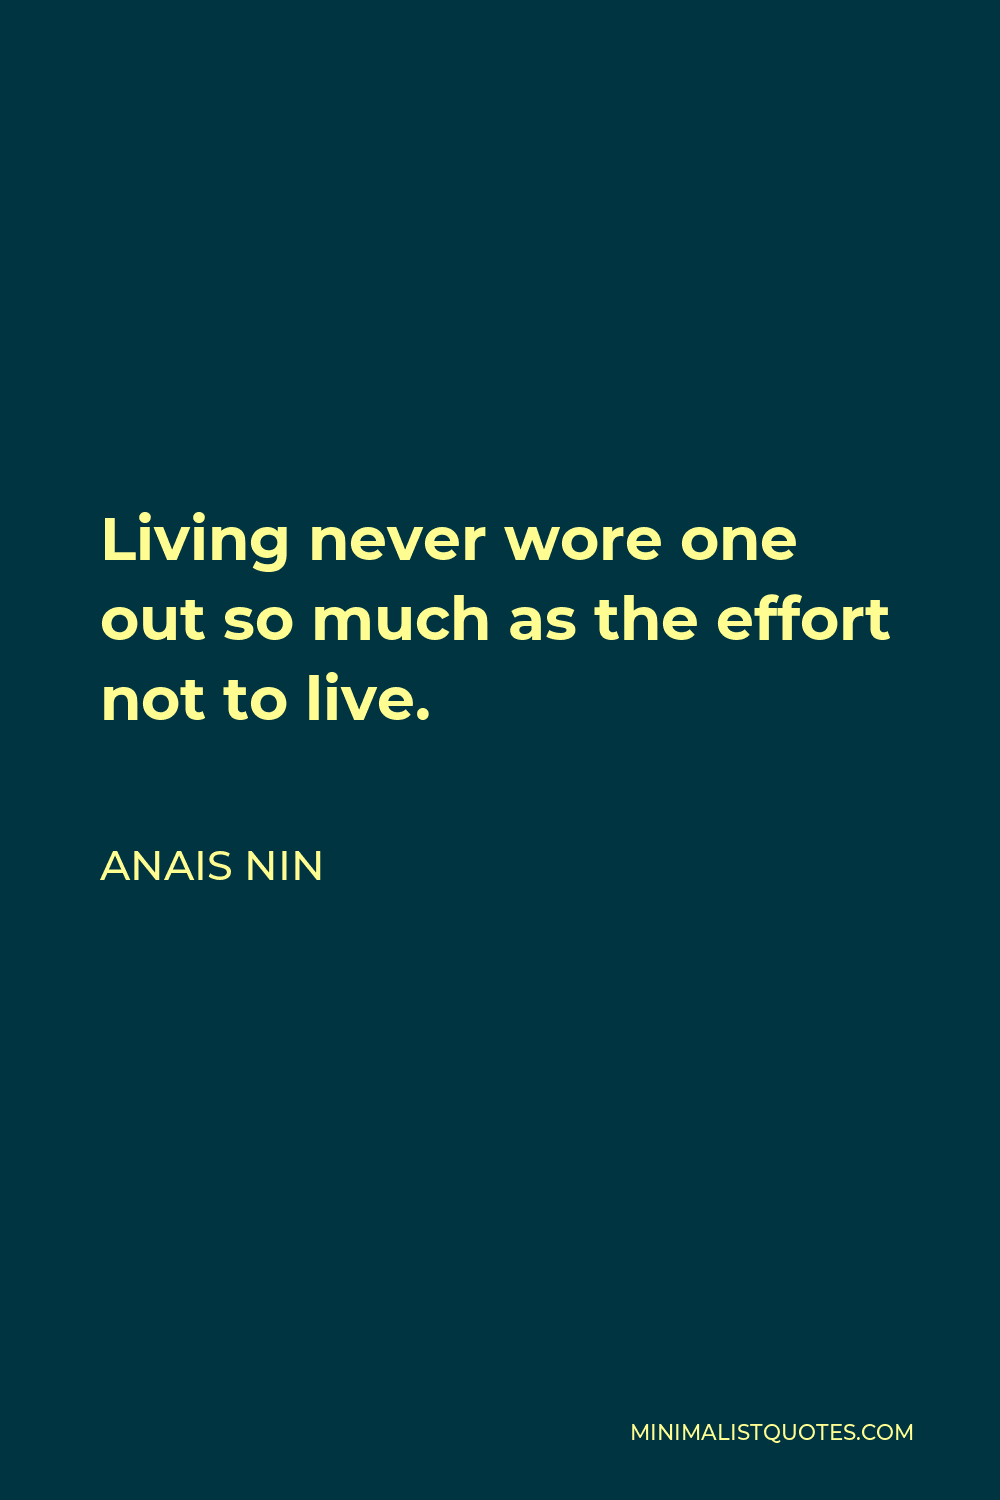 Anais Nin Quote - Living never wore one out so much as the effort not to live.